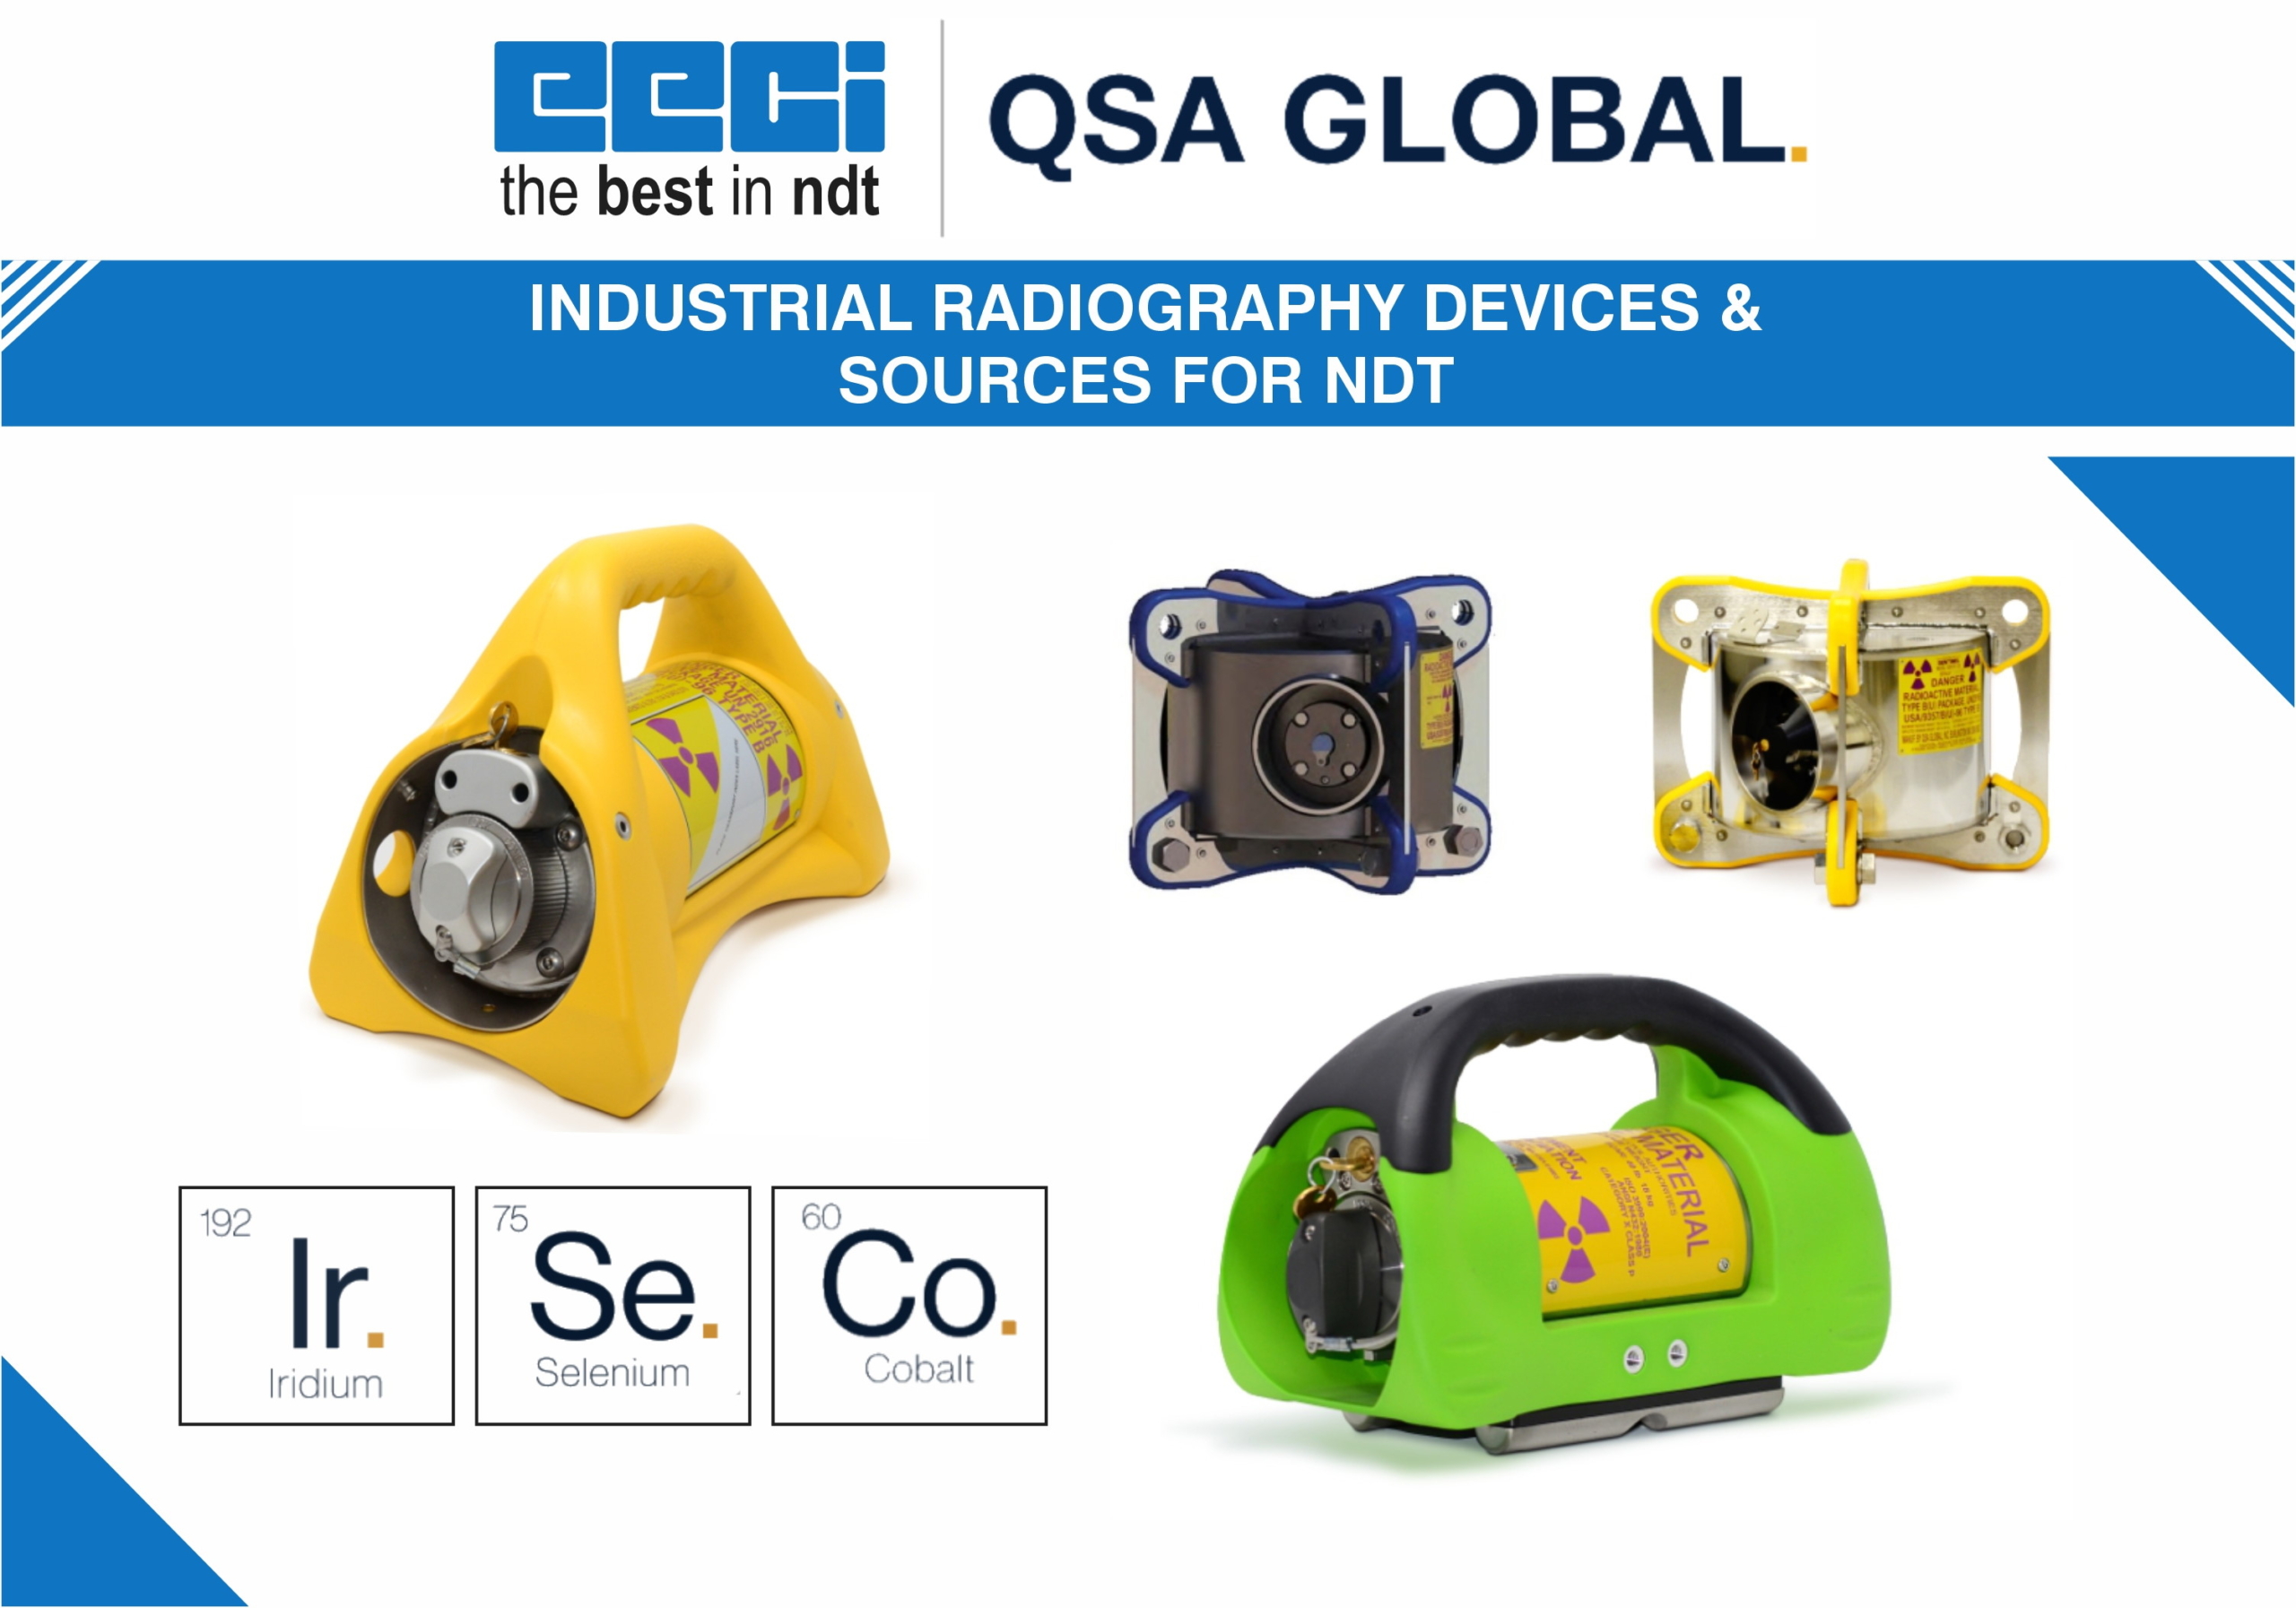 INDUSTRIAL RADIOGRAPHY DEVICES & SOURCES FOR NDT